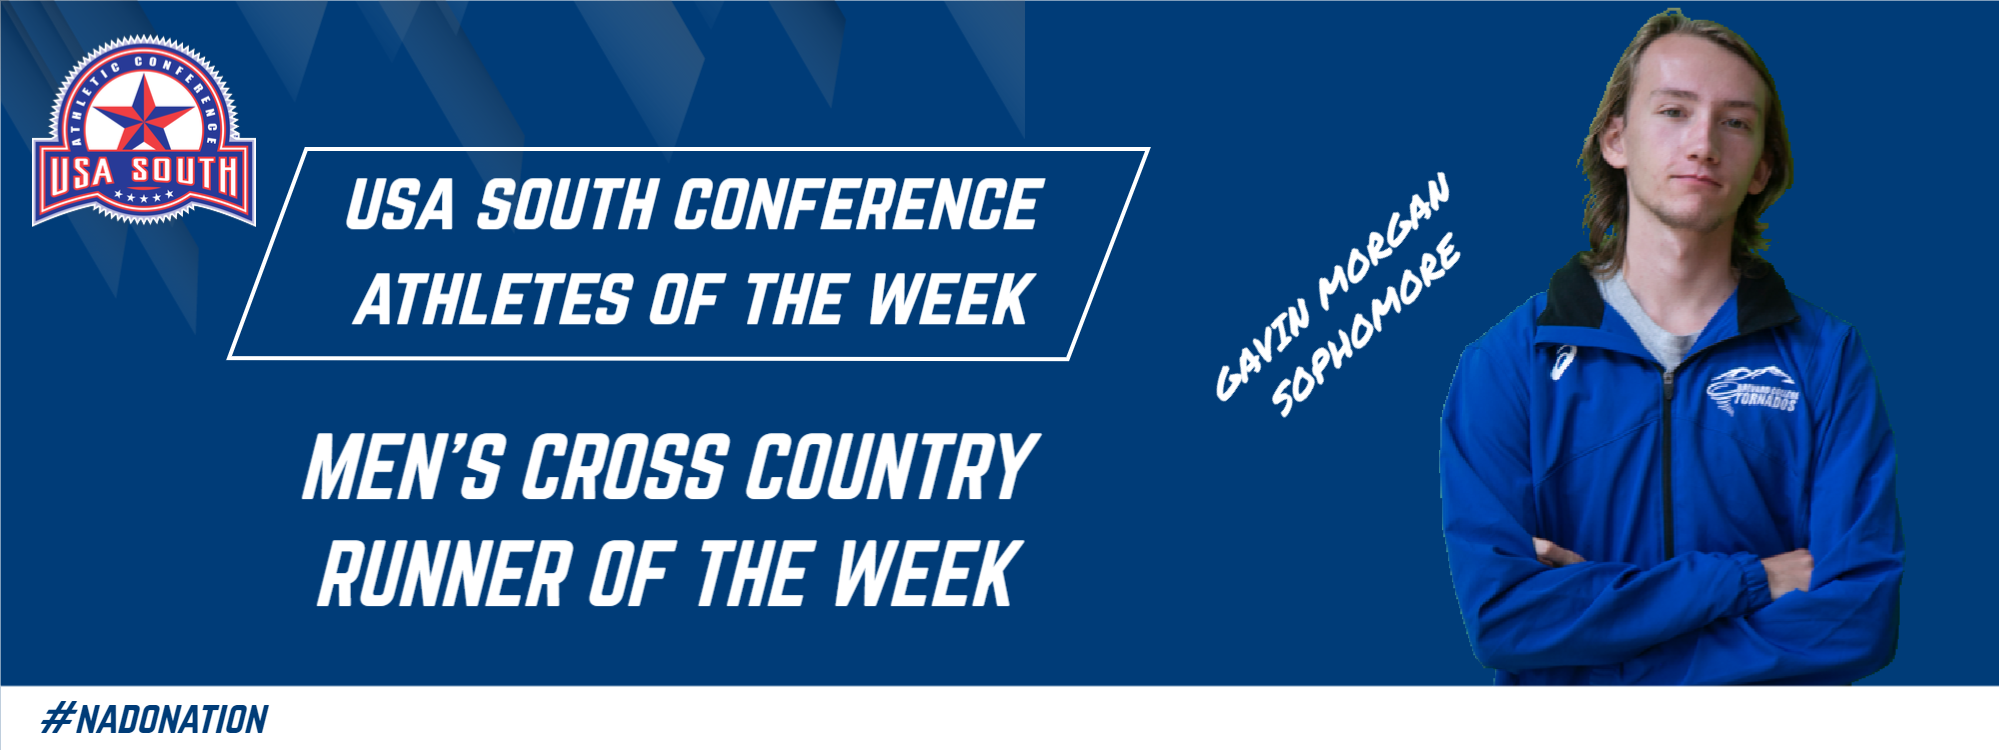 Gavin Morgan Claims USA South Conference Cross Country Runner of the Week Honor